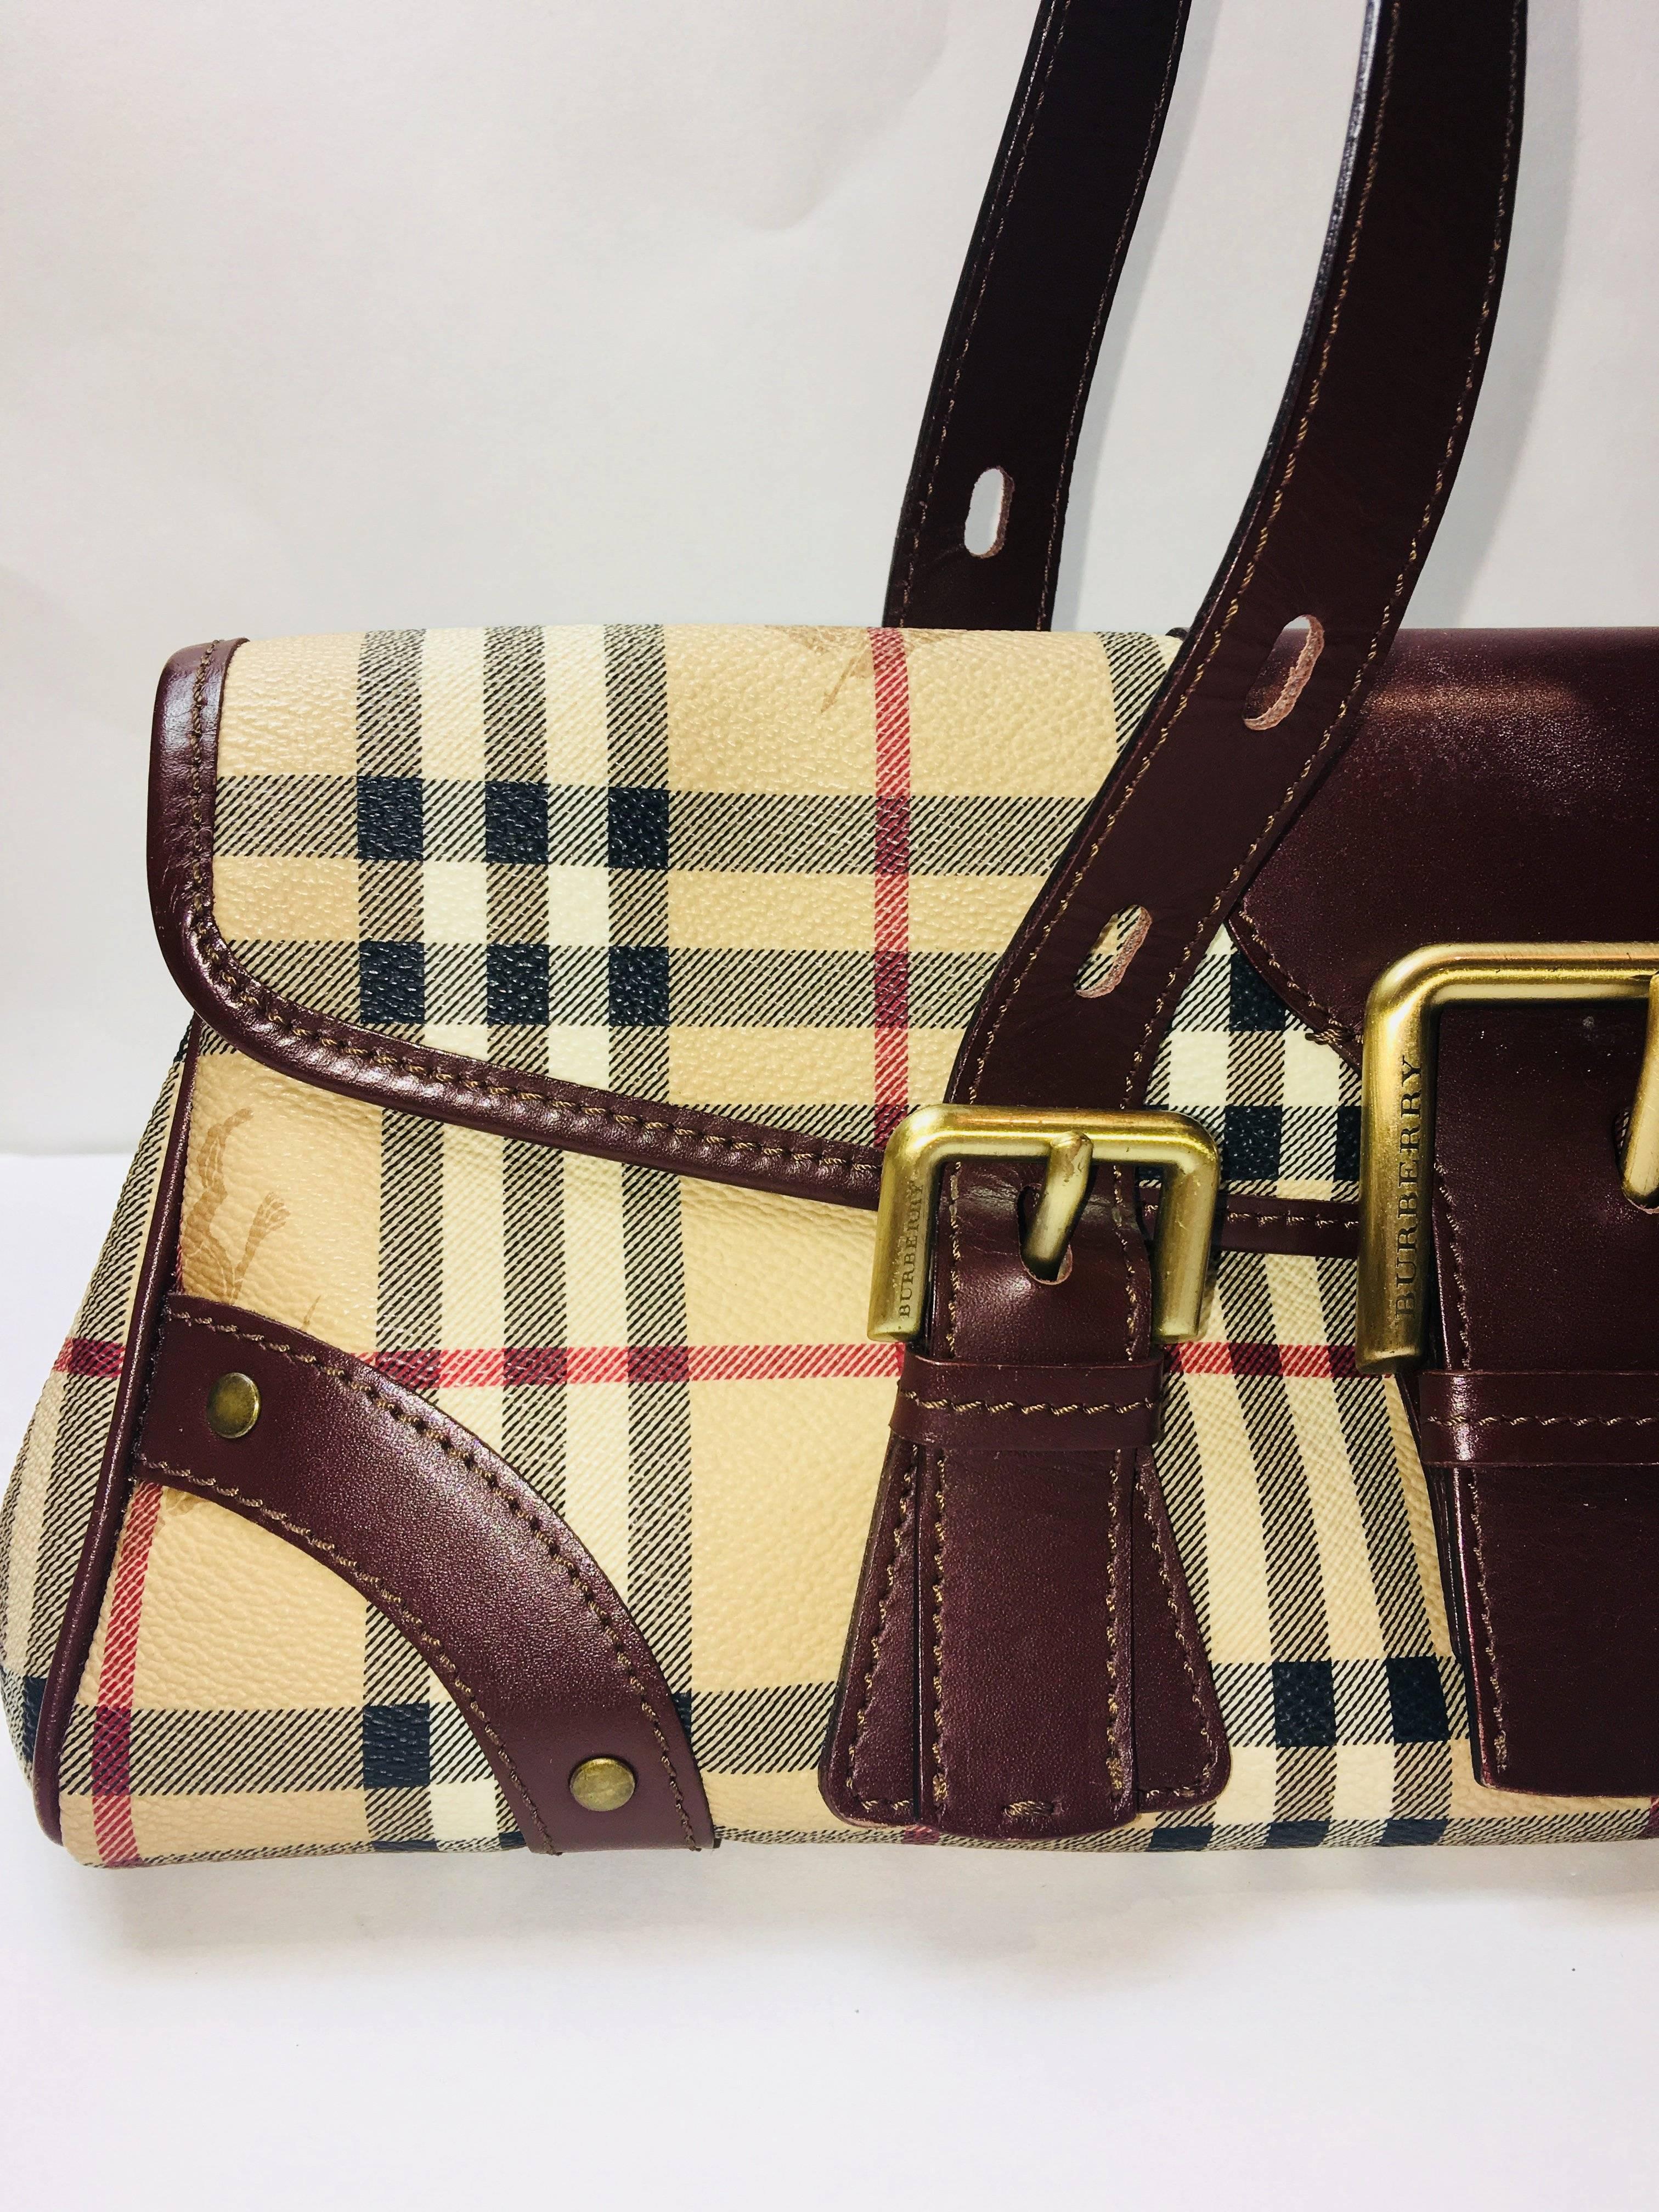 Burberry Nova Check Pattern Satchel Bag with Brown Leather Trim Throughout. 